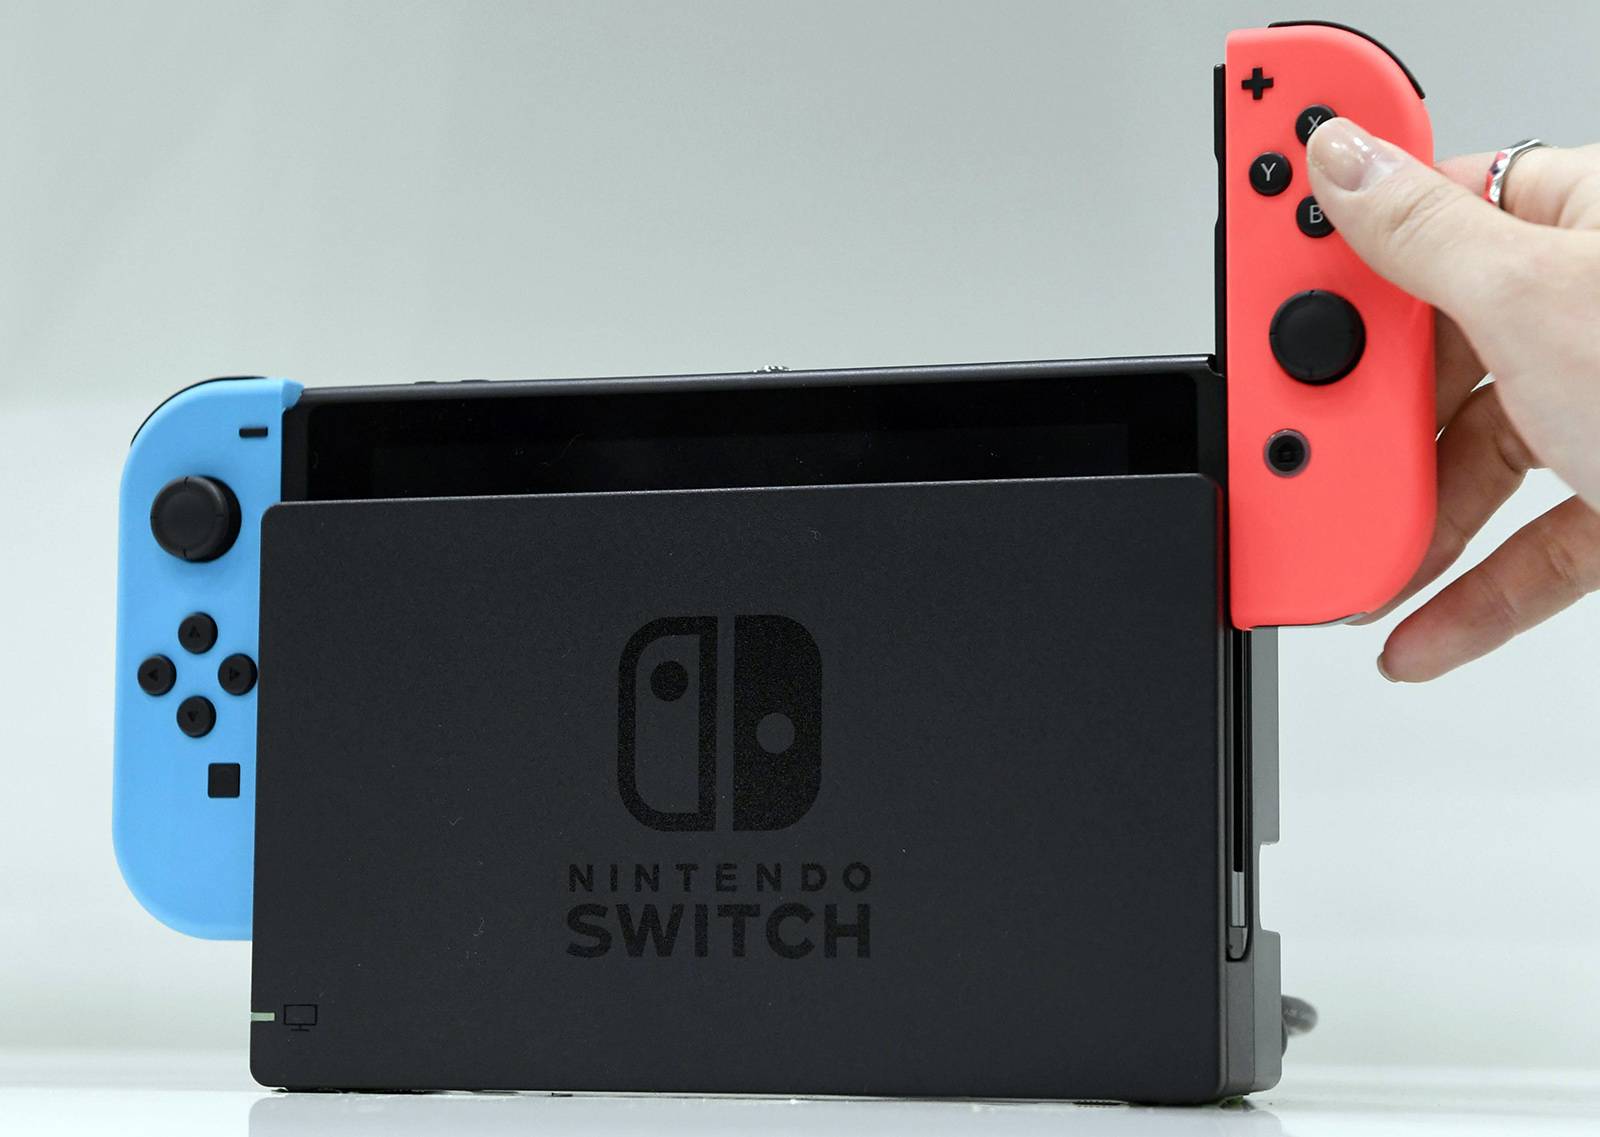 Nintendo’s unreleased Swap Skilled price can also’ve lawful leaked from a retailer